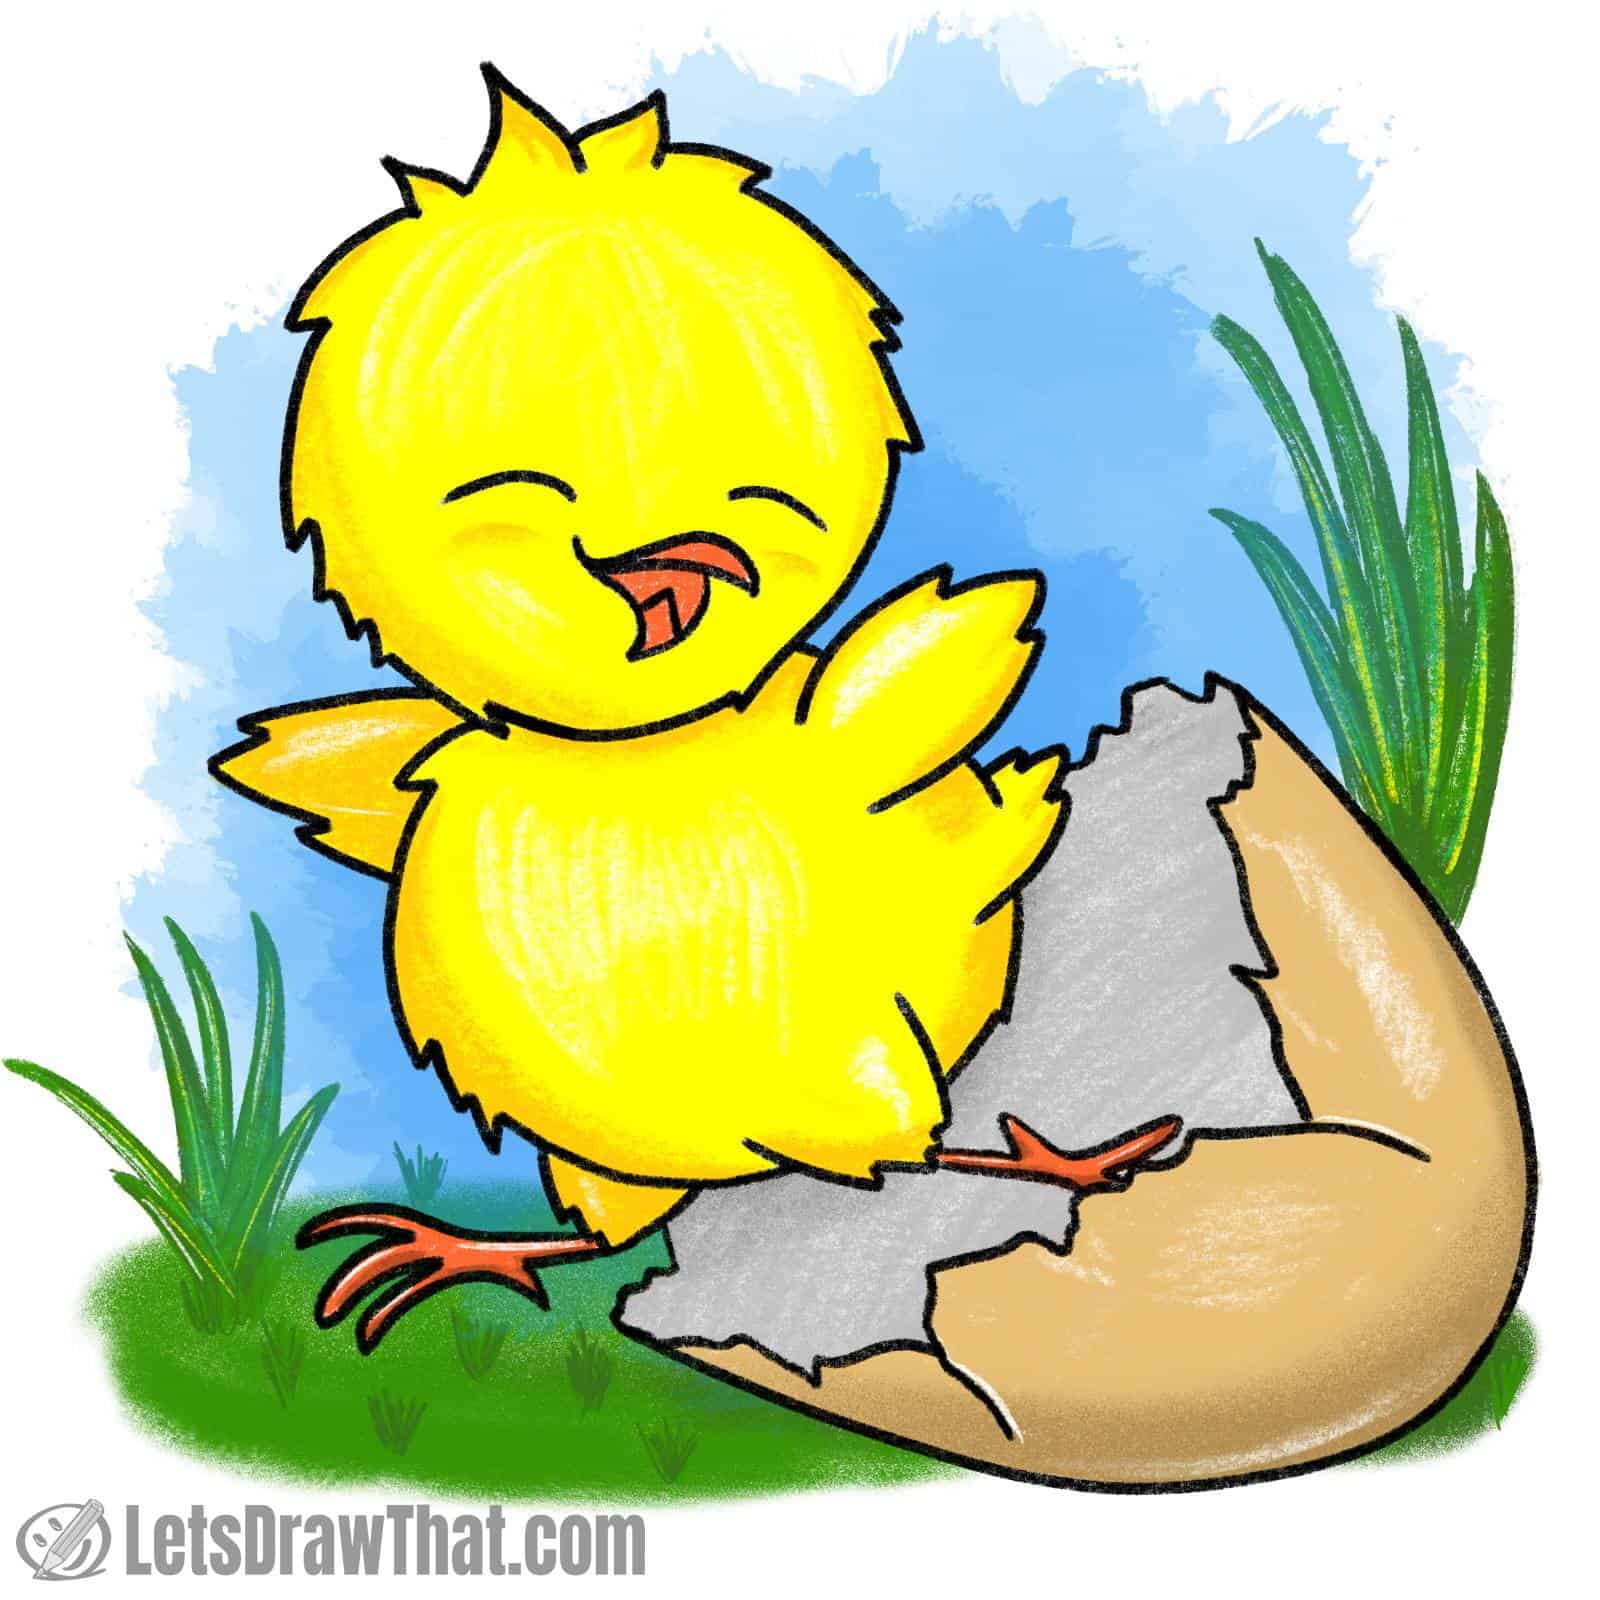 How to draw a chick: finished drawing coloured-in